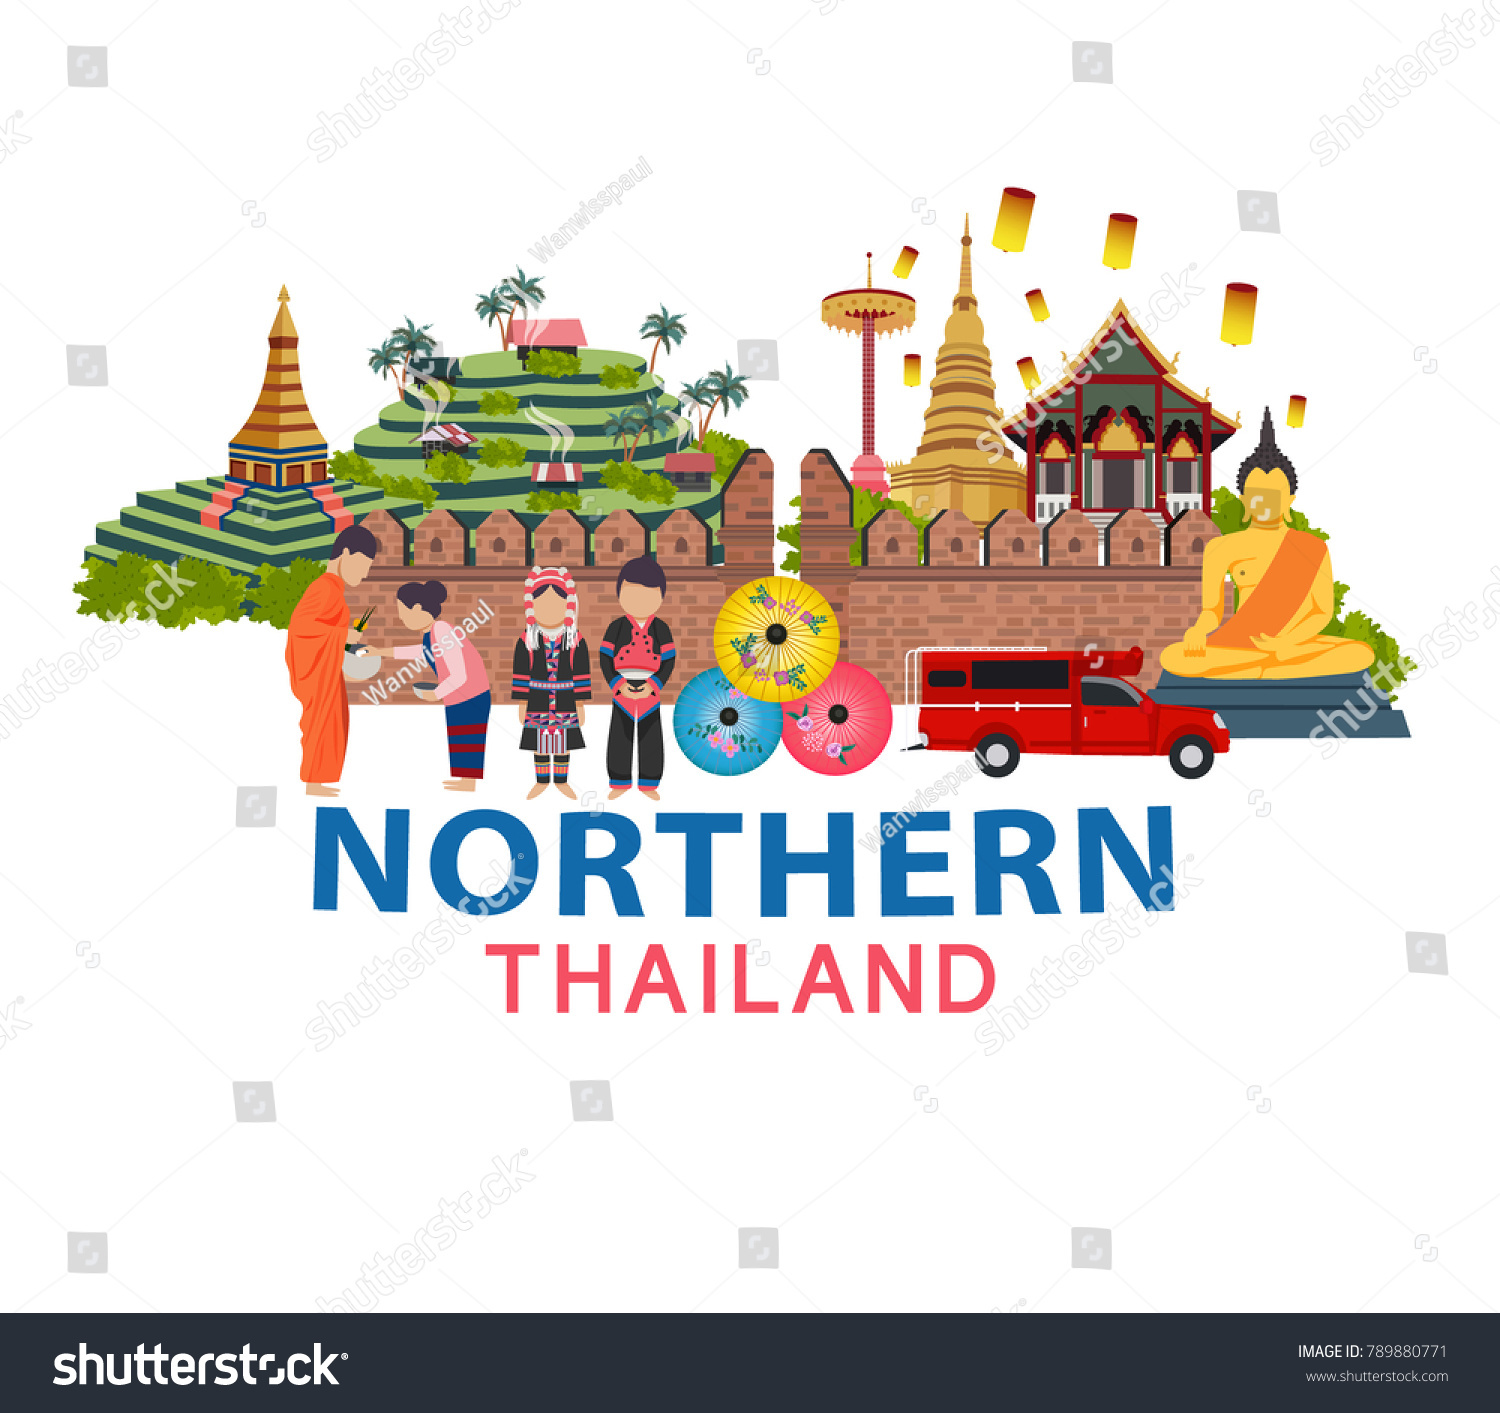 SVG of Thailand travel with Northern culture concept, all in flat style design illustration svg